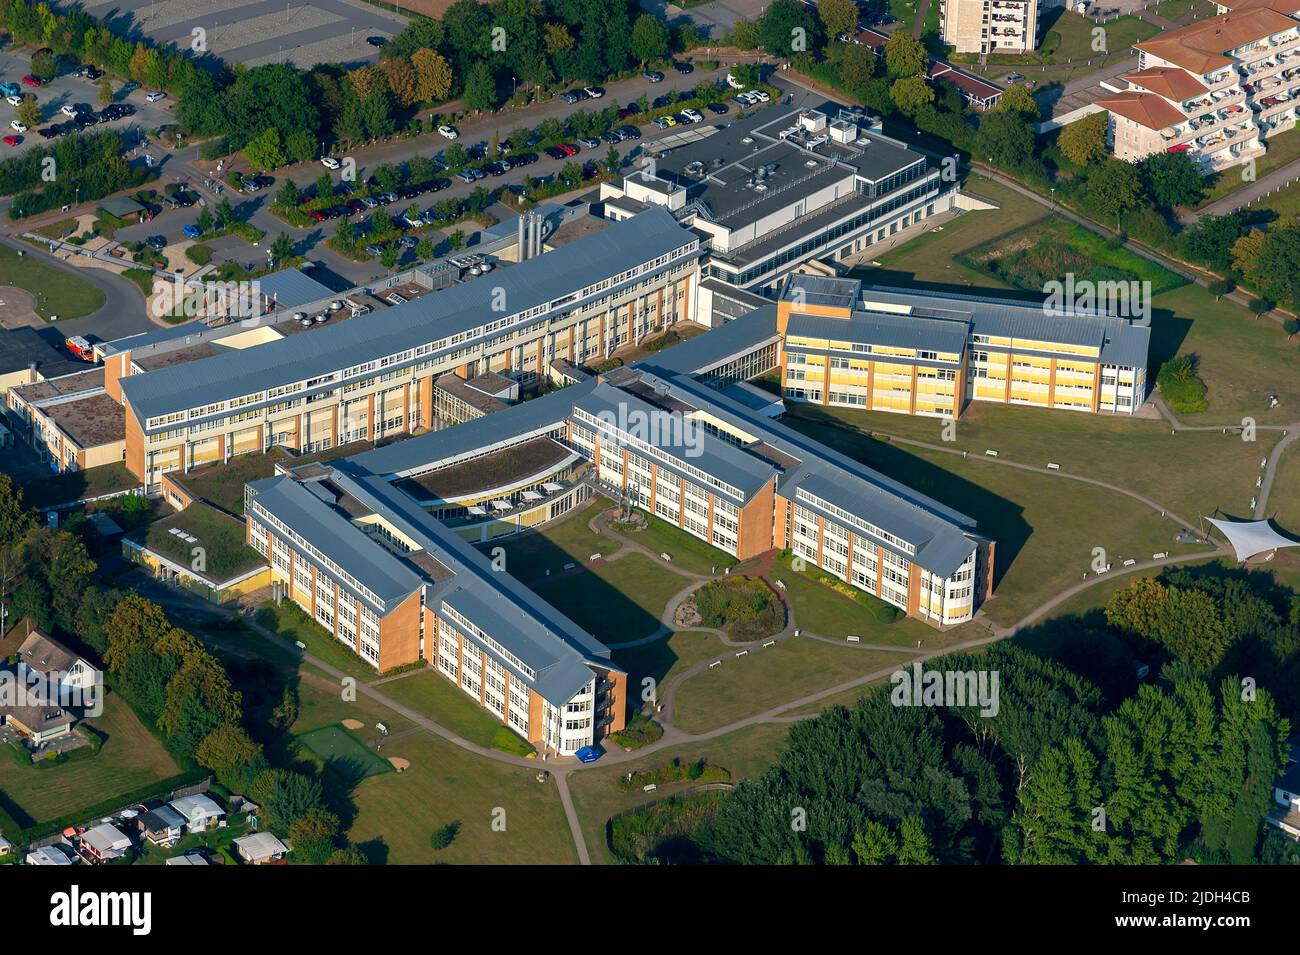 Schoen Clinic Neustadt - Clinic for orthopedic rehabilitation, aerial view 08/31/2019, Germany, Schleswig-Holstein Stock Photo